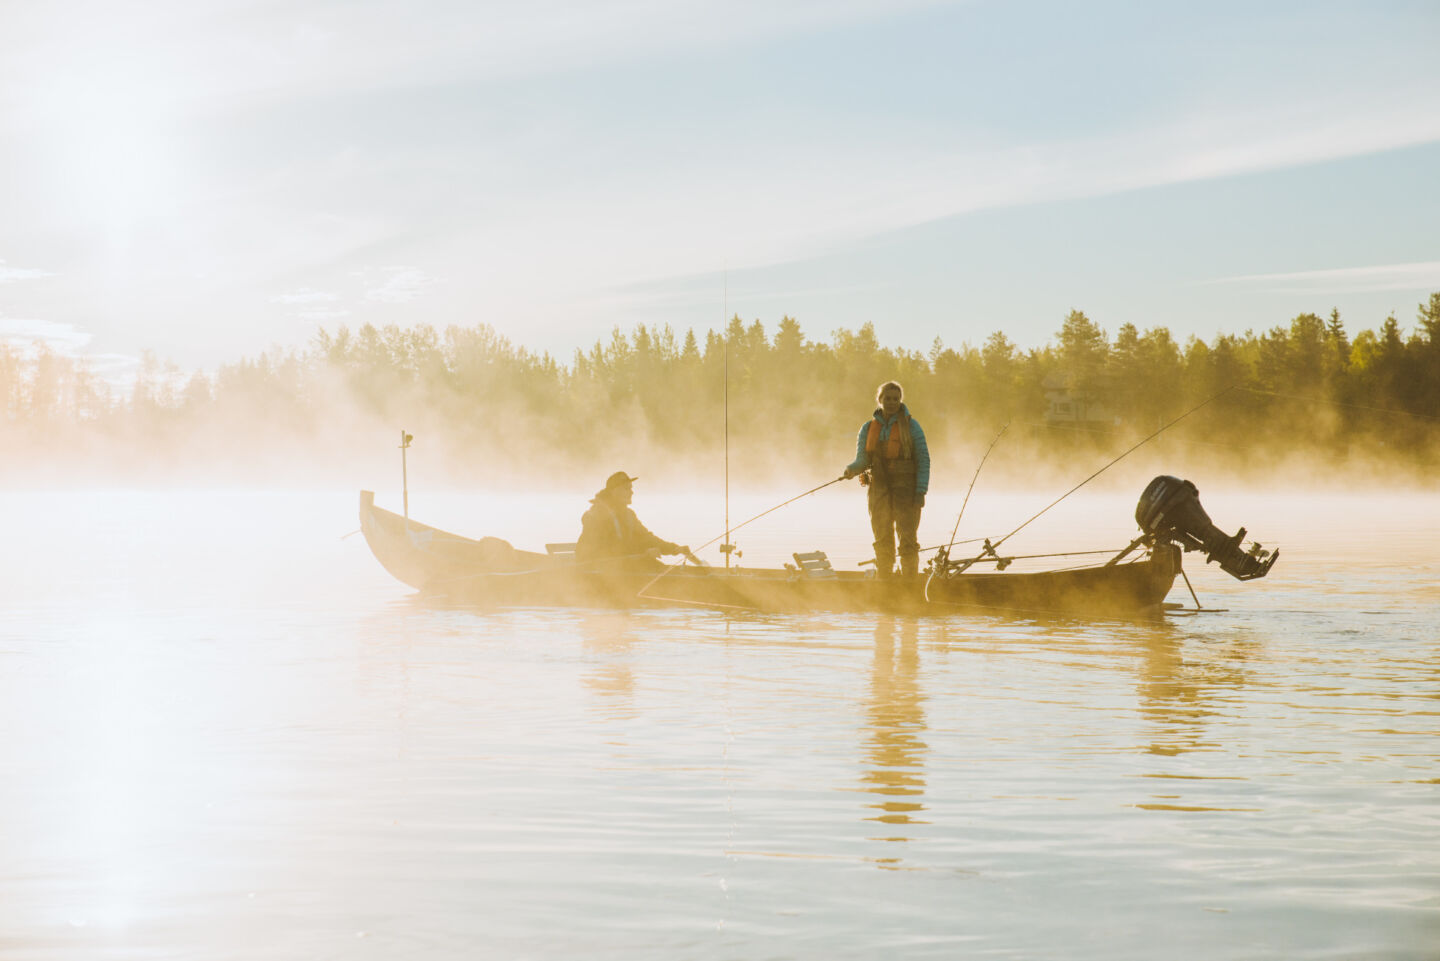 Flyfishing on the Tornio River in Pello, Finland